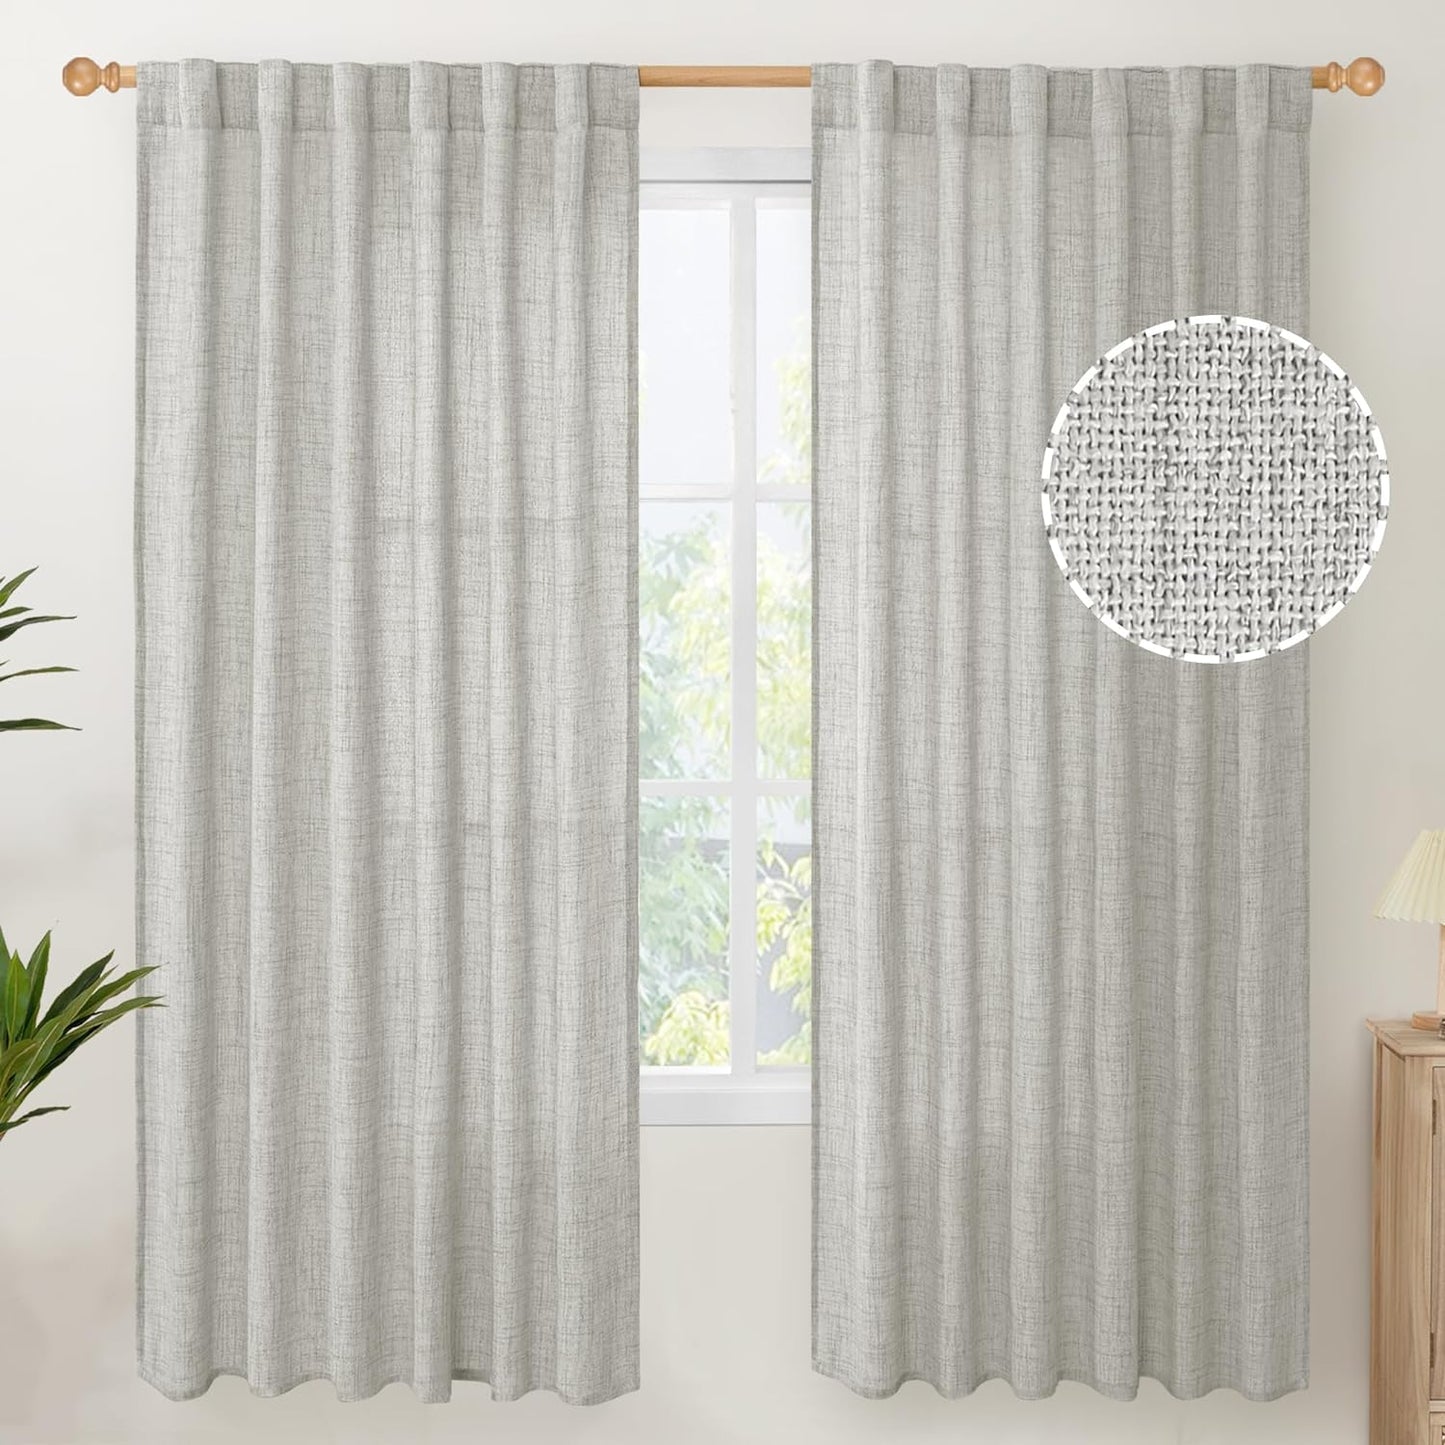 Youngstex Natural Linen Curtains 72 Inch Length 2 Panels for Living Room Light Filtering Textured Window Drapes for Bedroom Dining Office Back Tab Rod Pocket, 52 X 72 Inch  YoungsTex Light Grey 52W X 72L 